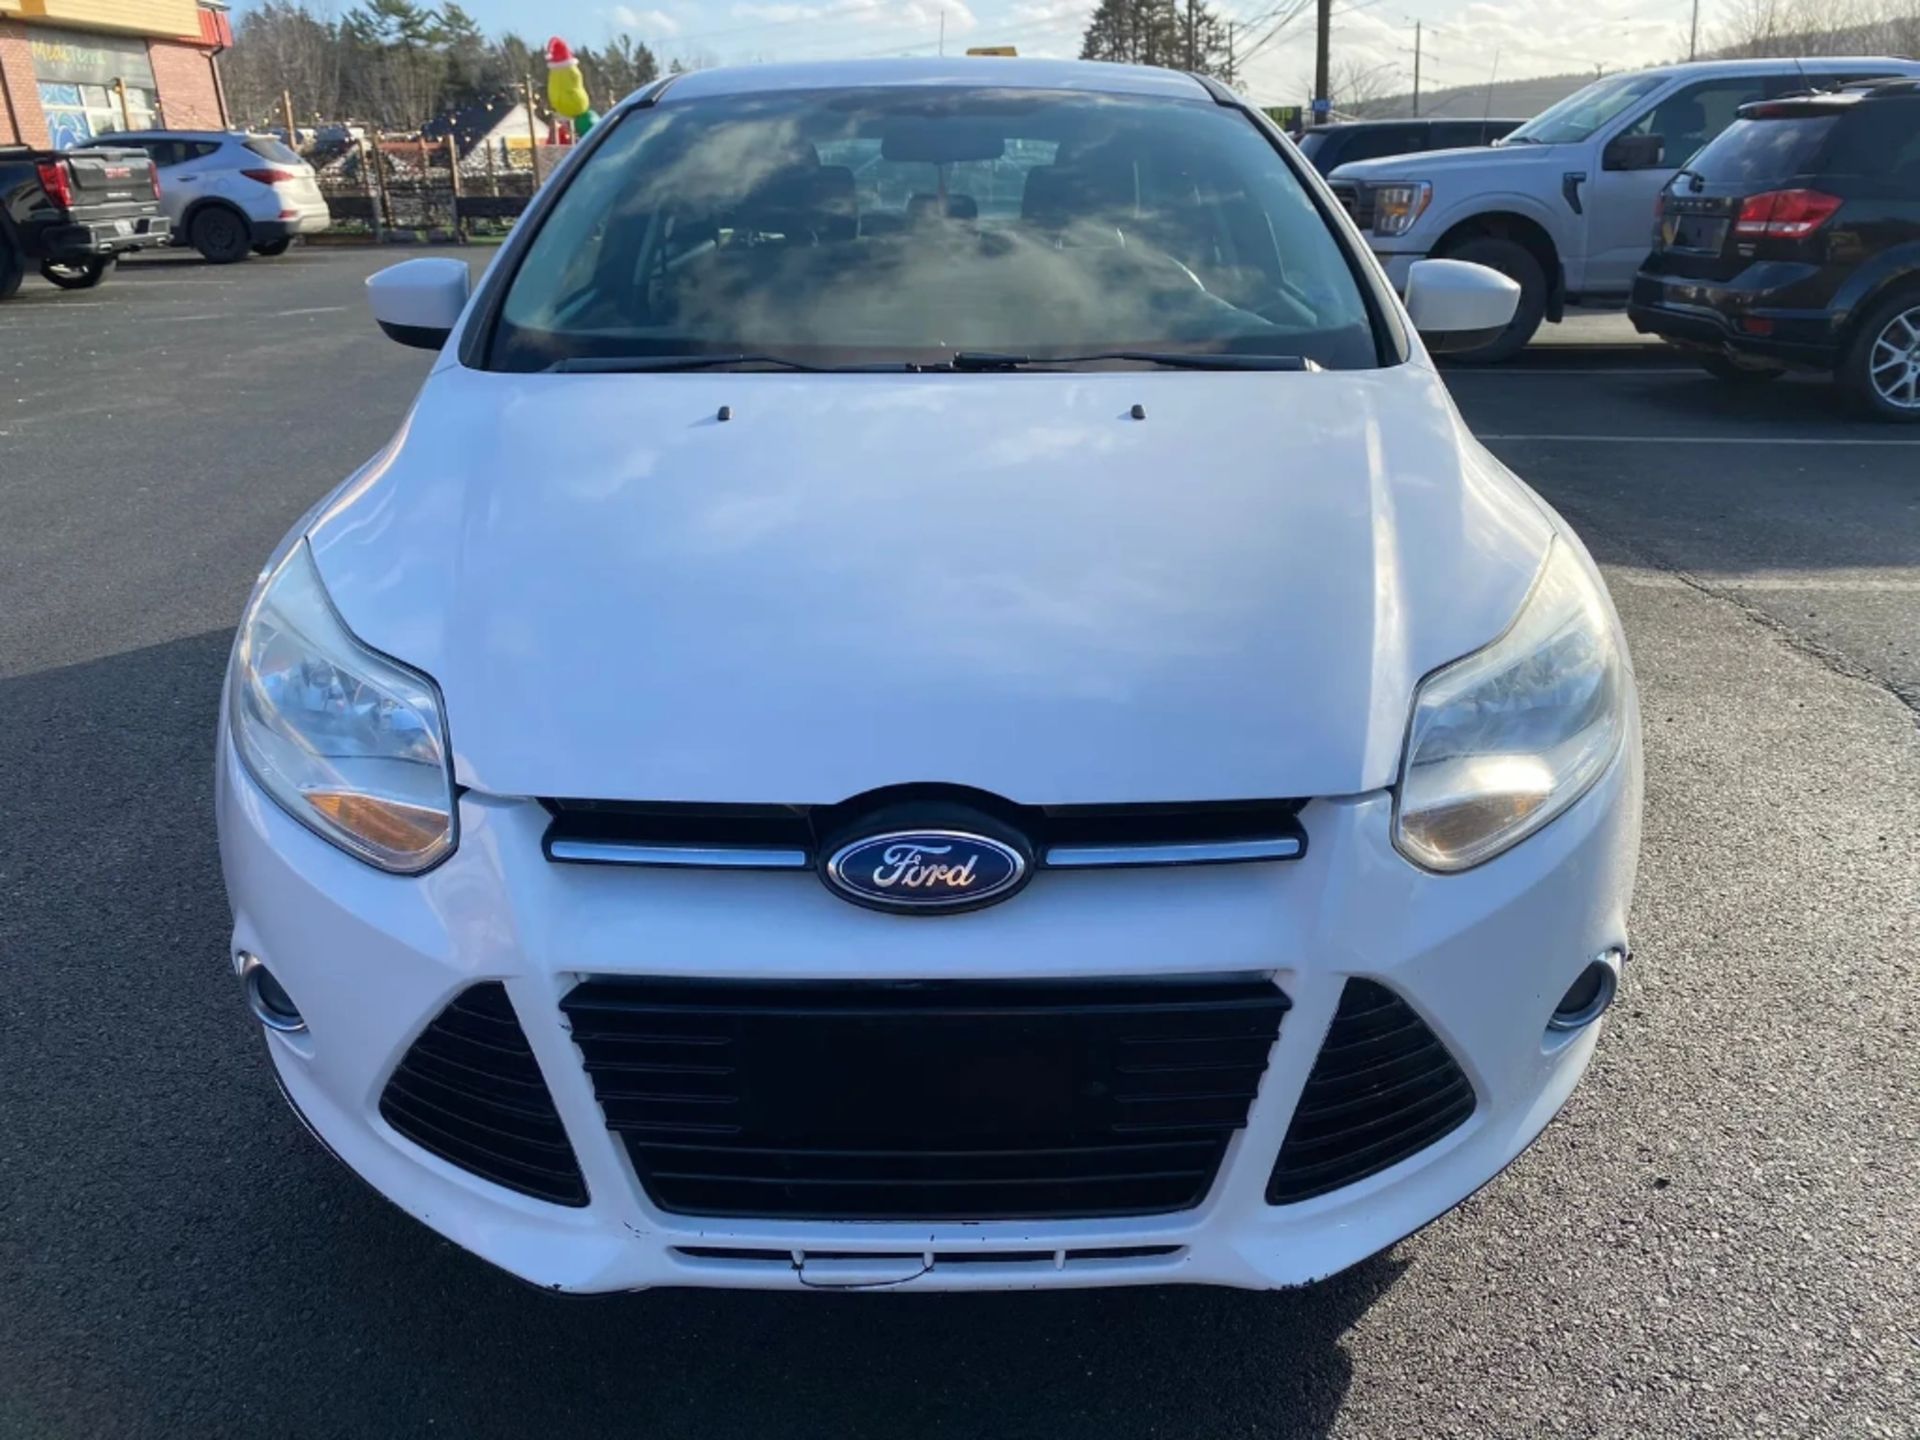 2012 FORD FOCUS - Image 2 of 11